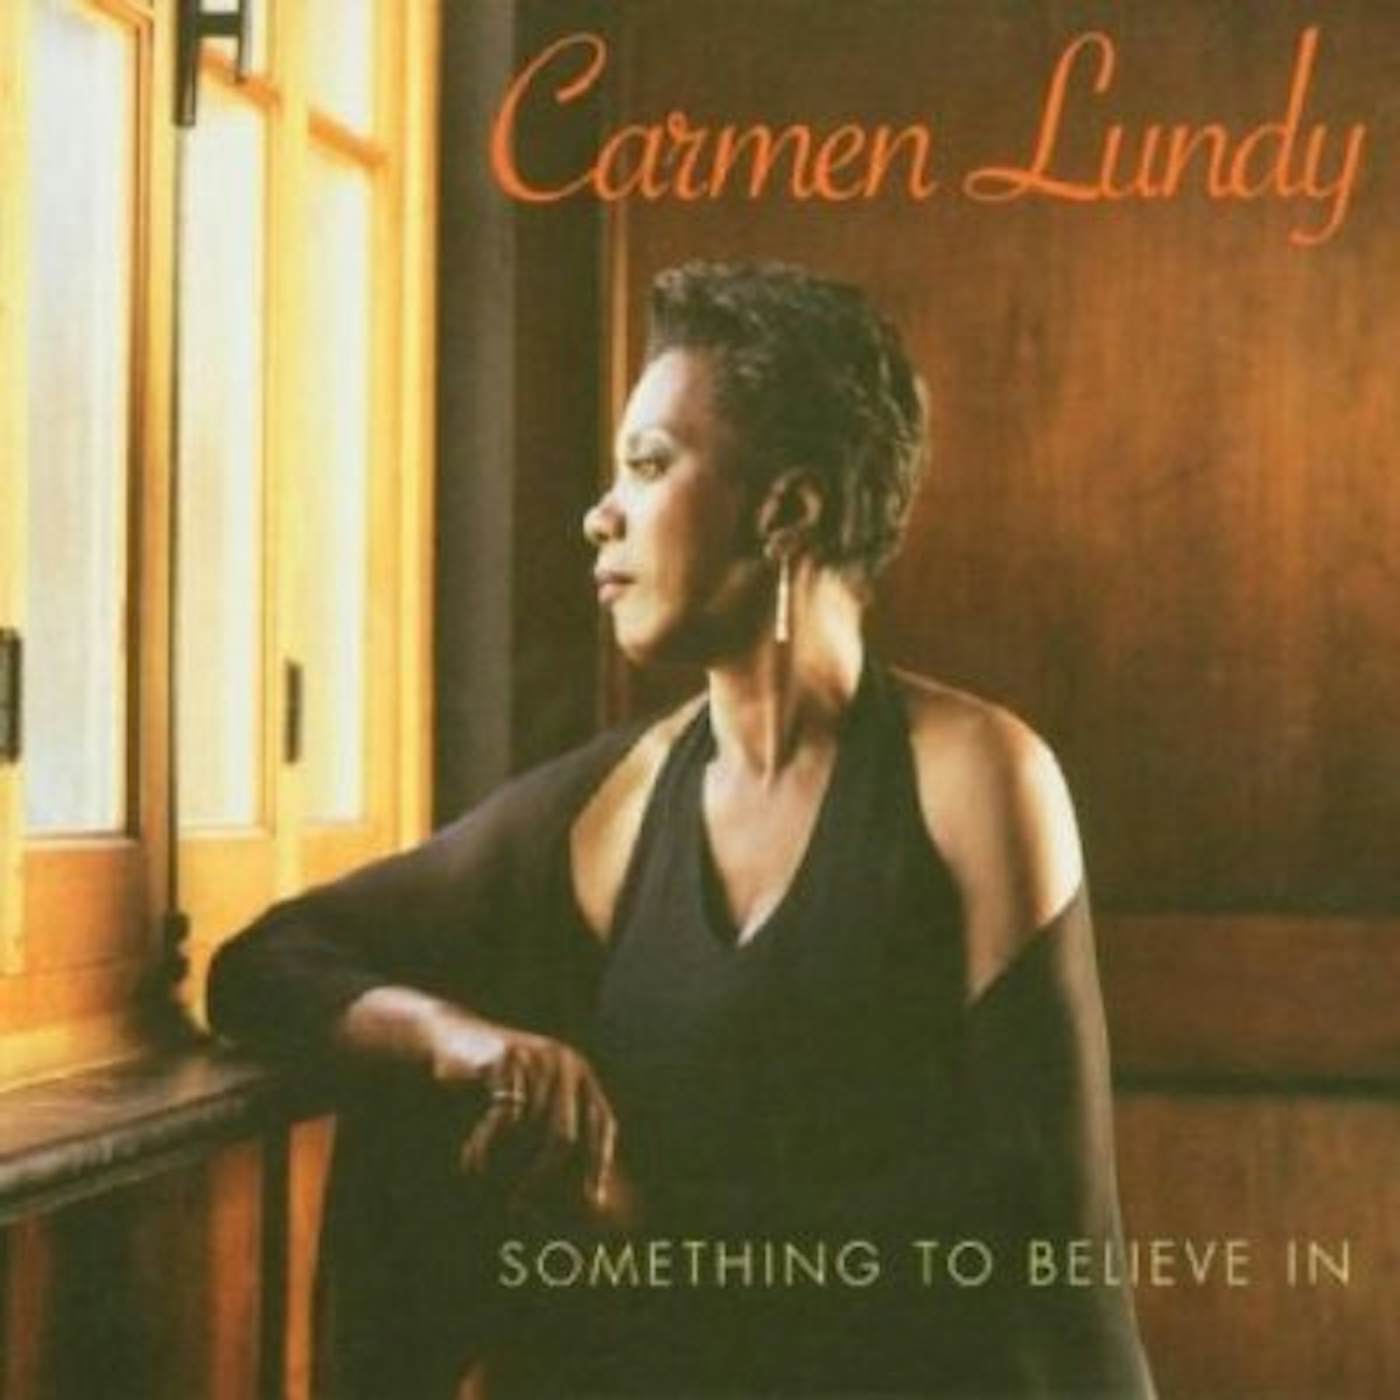 Carmen Lundy SOMETHING TO BELIEVE IN CD